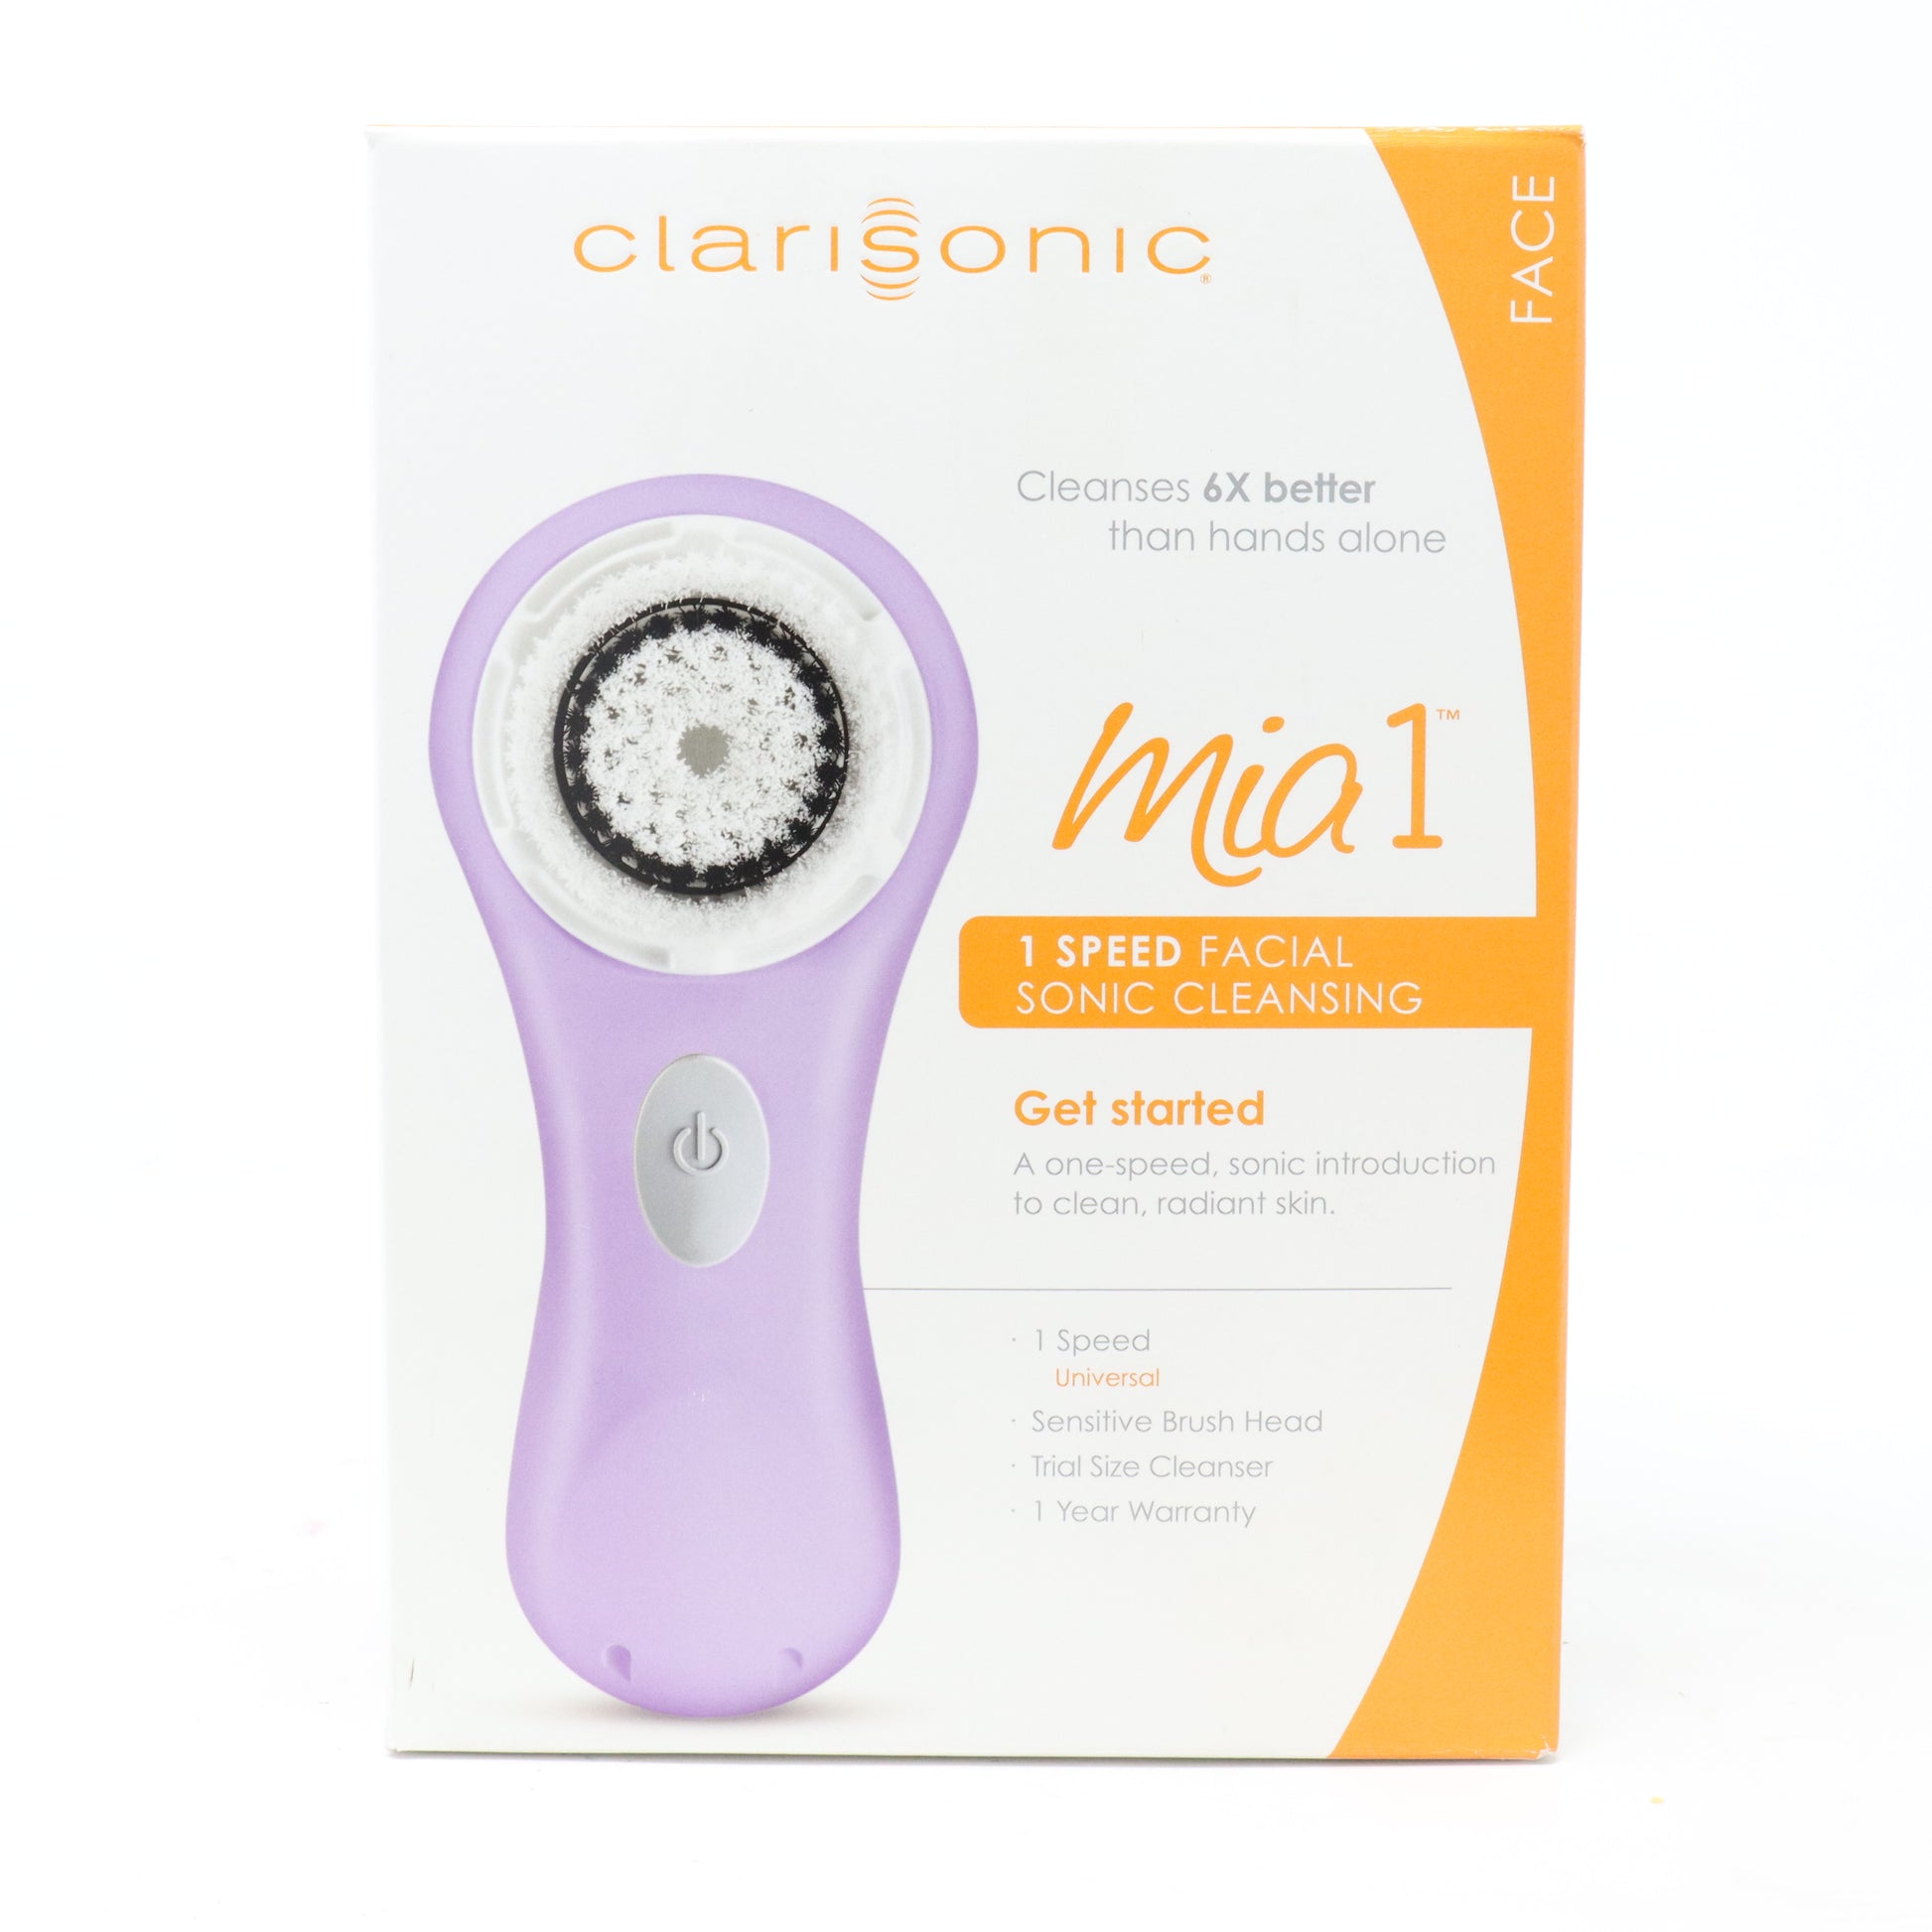 Mia 1 One Speed Facial Sonic Cleansing Set